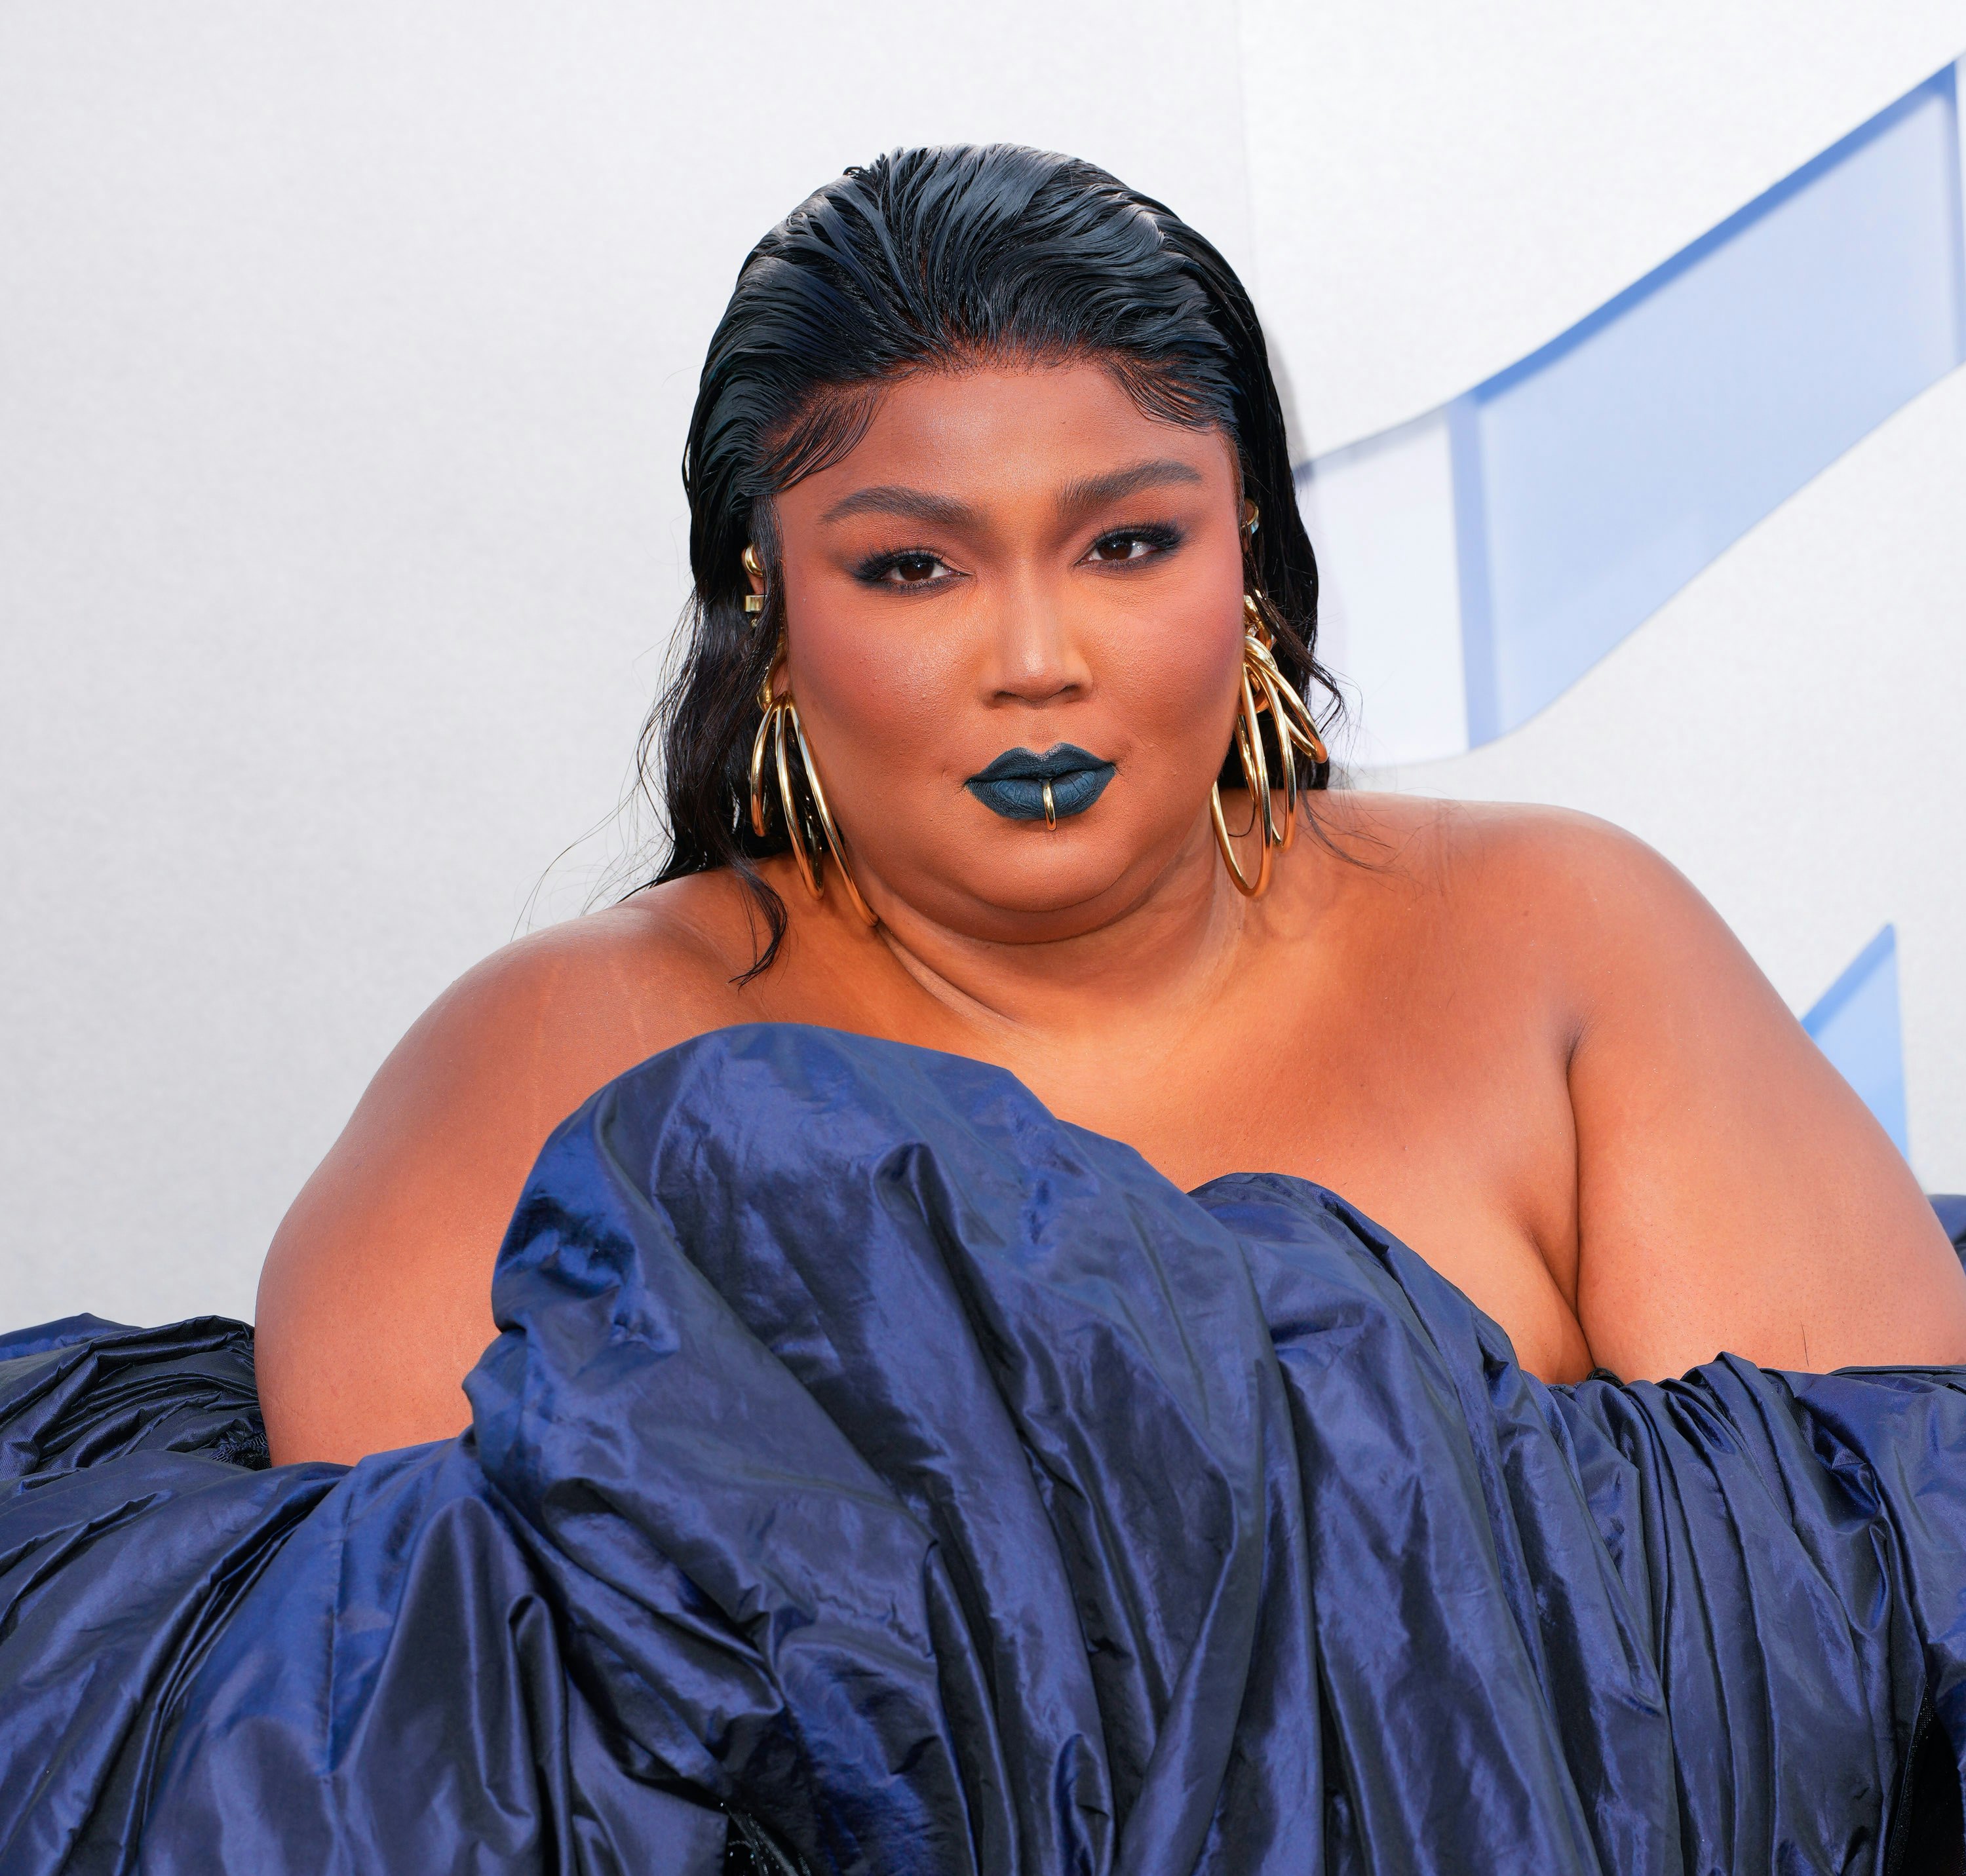 Lizzo & Cardi B Are Teaming Up On New Collab 'Rumors': Photo